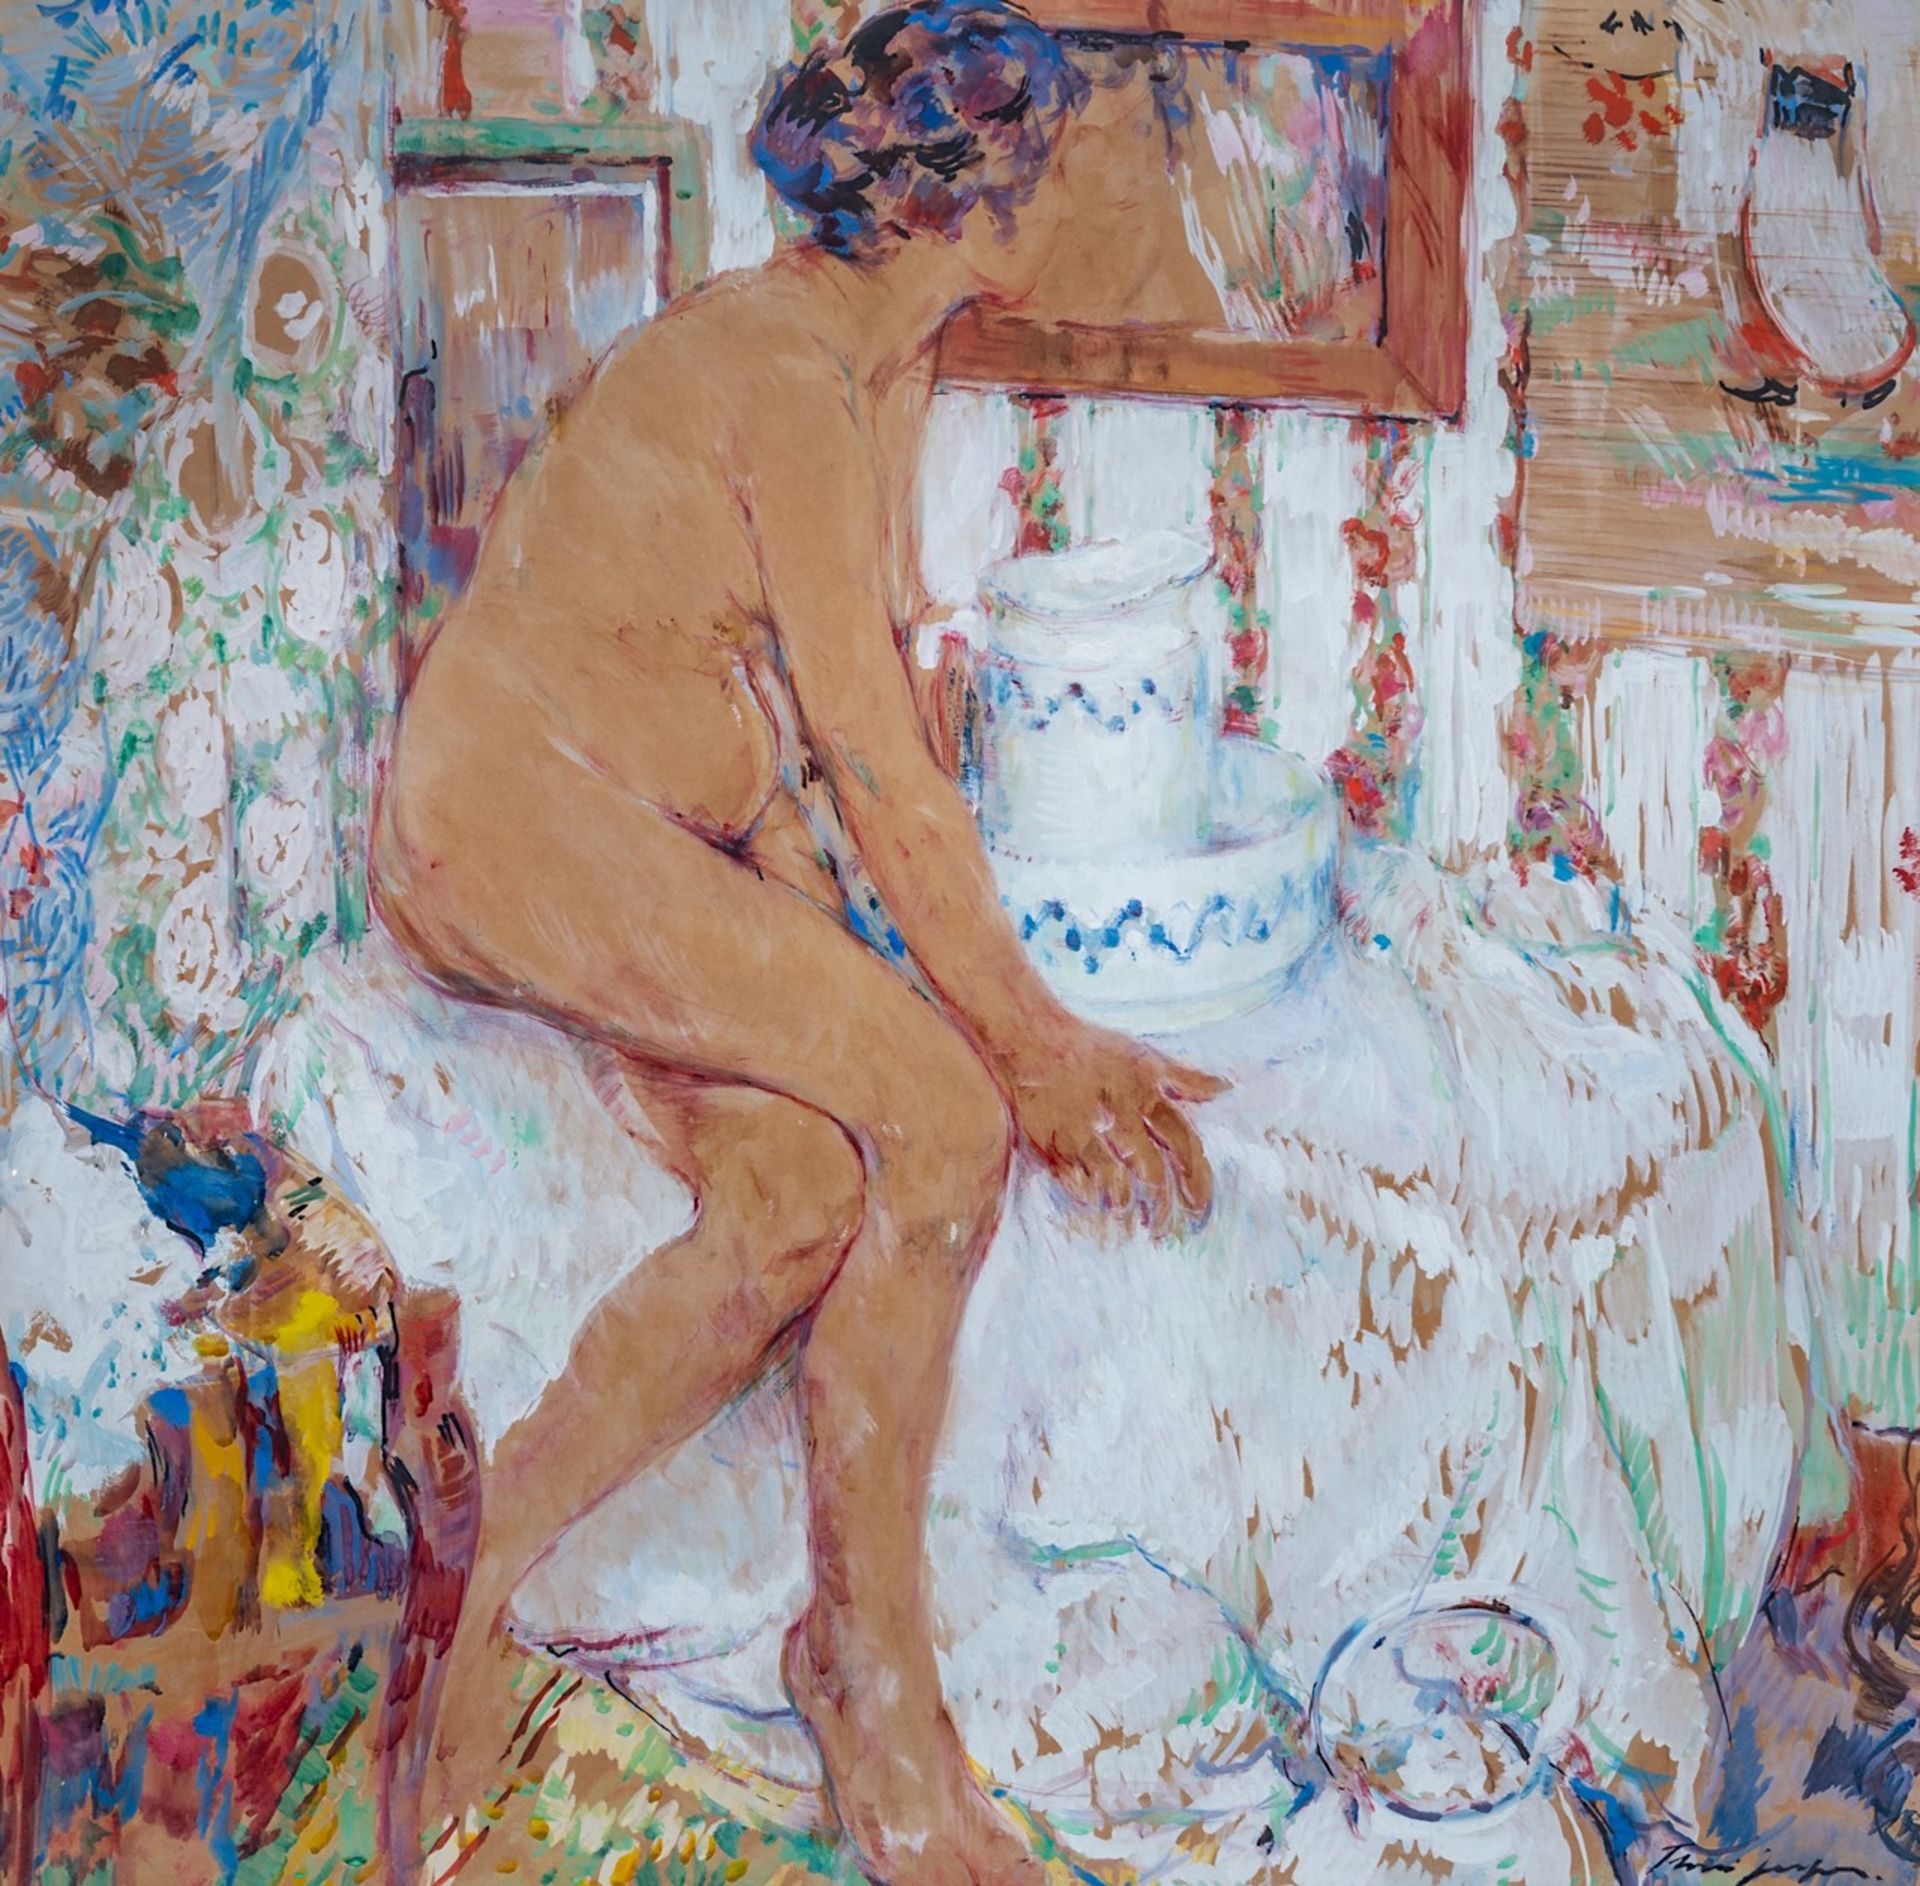 Floris Jespers (1889-1965), female nude sitting in an interior, 1915, watercolour and gouache on pap